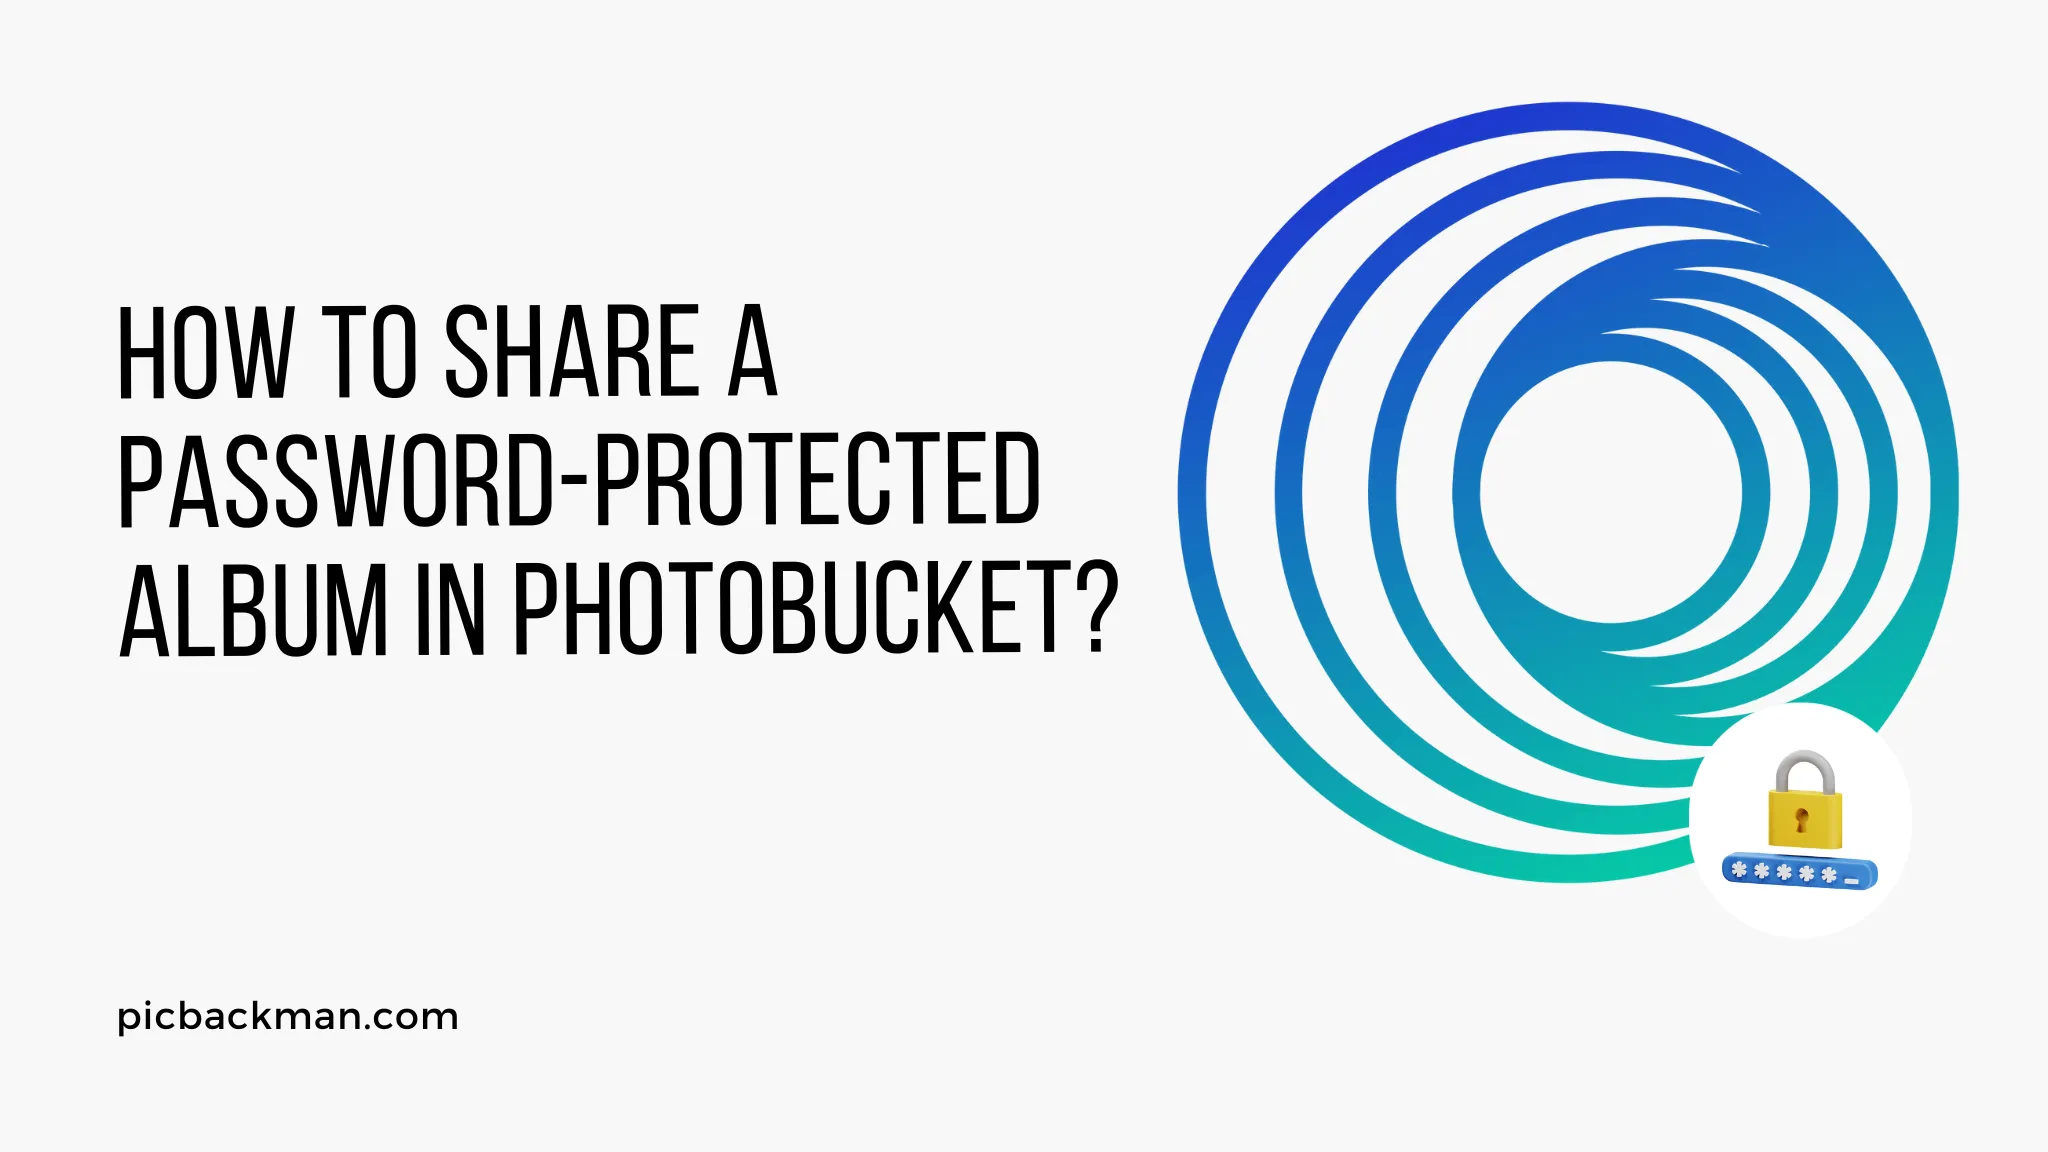 How to Share a Password-Protected Album in Photobucket?